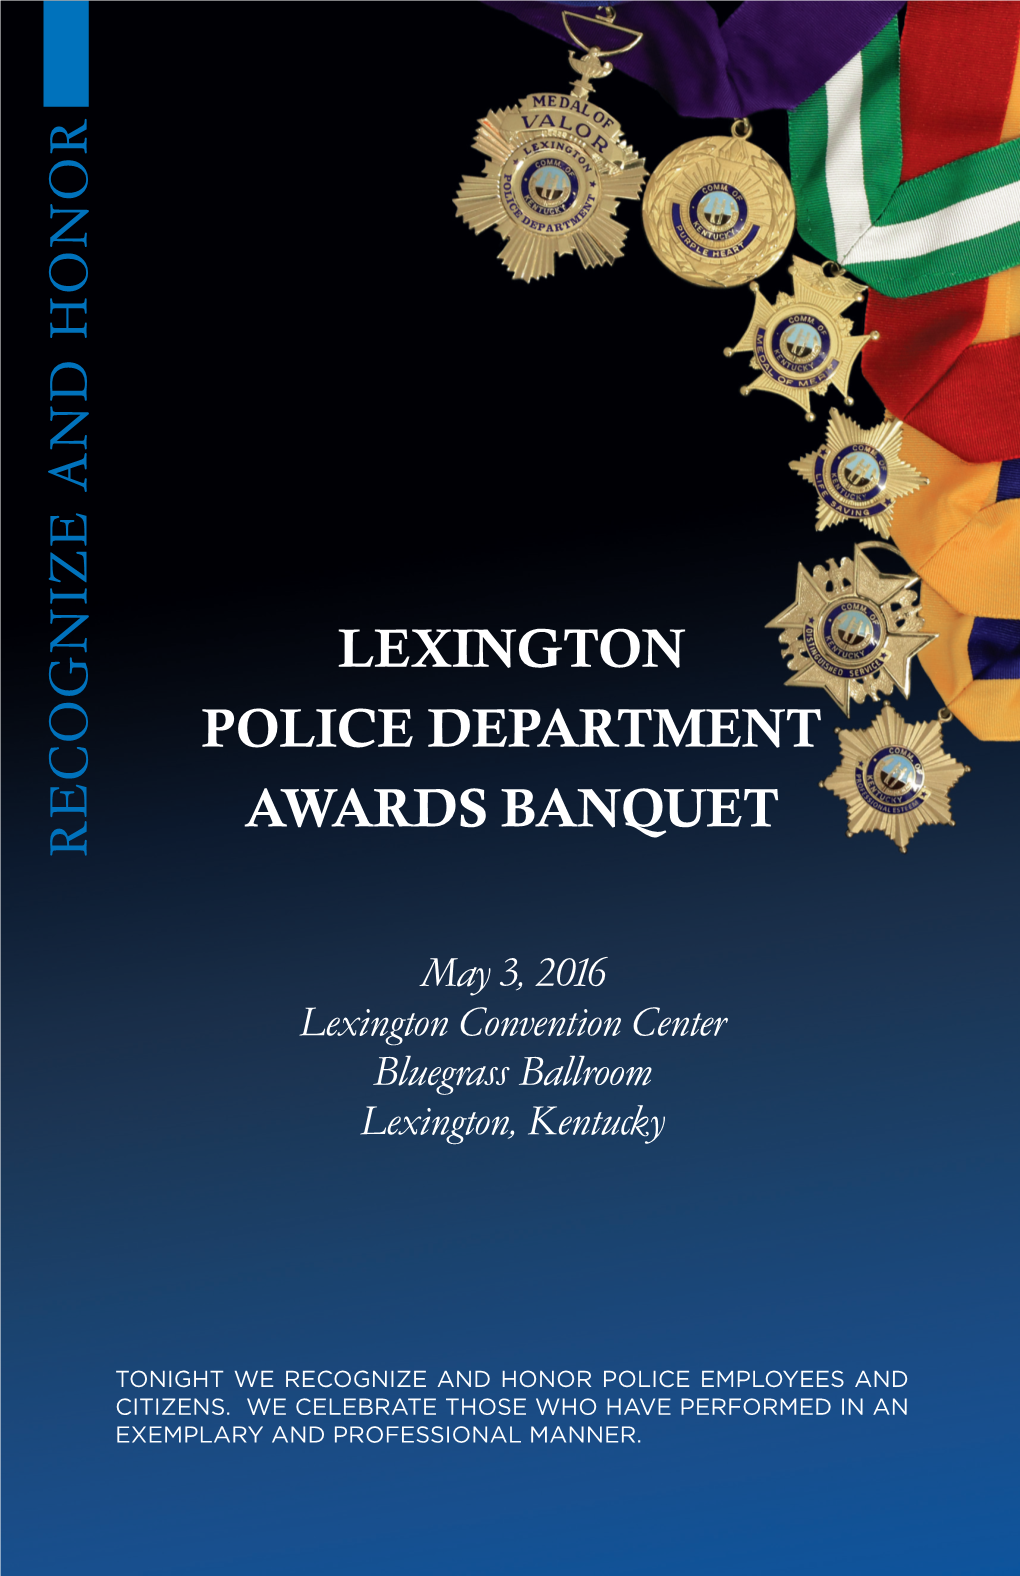 Lexington Police Department Awards Banquet Recognize and Honor